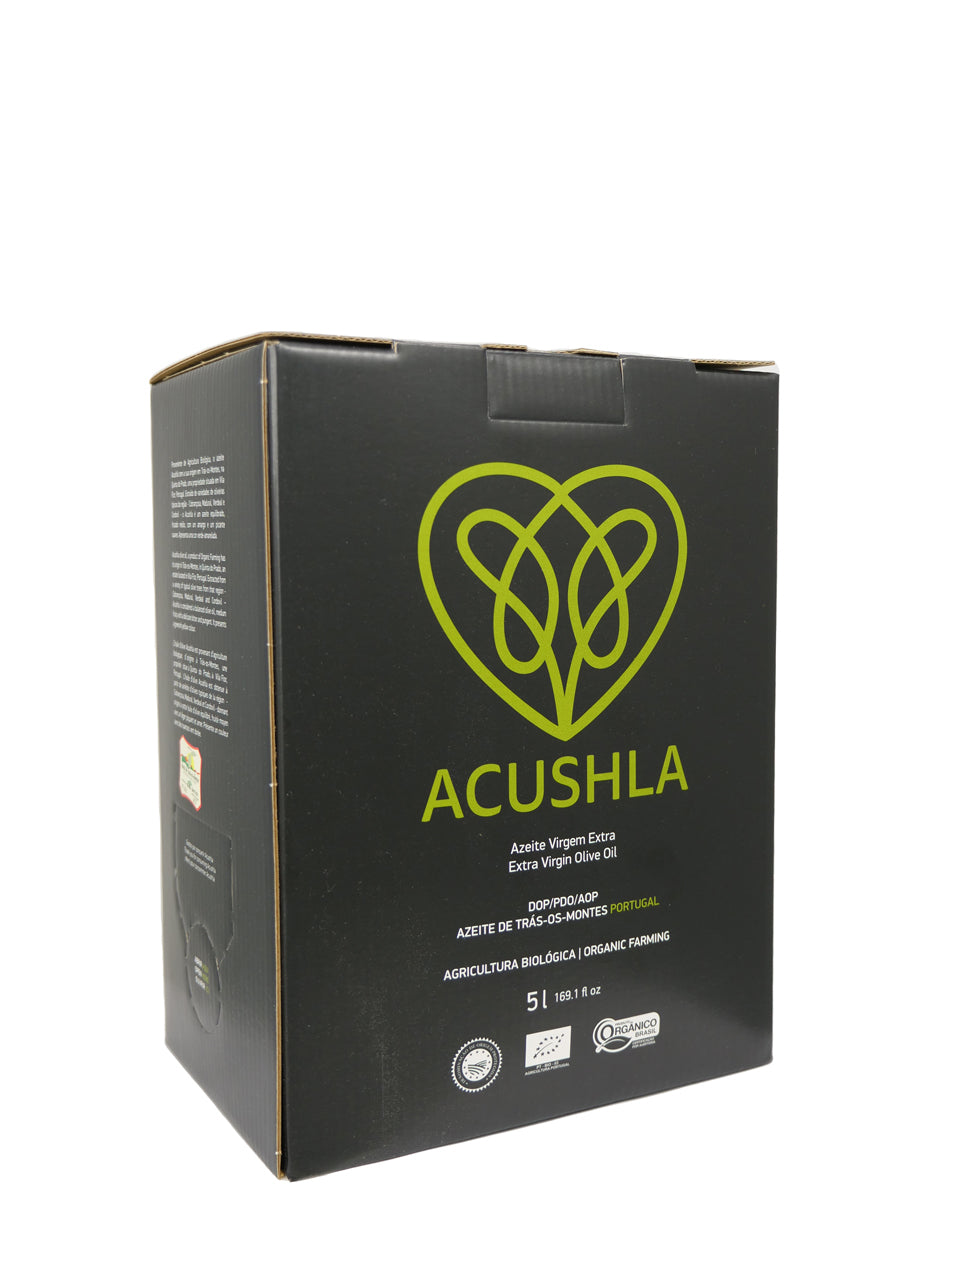 Acushla Organic DOP Trás-os-Montes 5L Bag in Box 4-Pack